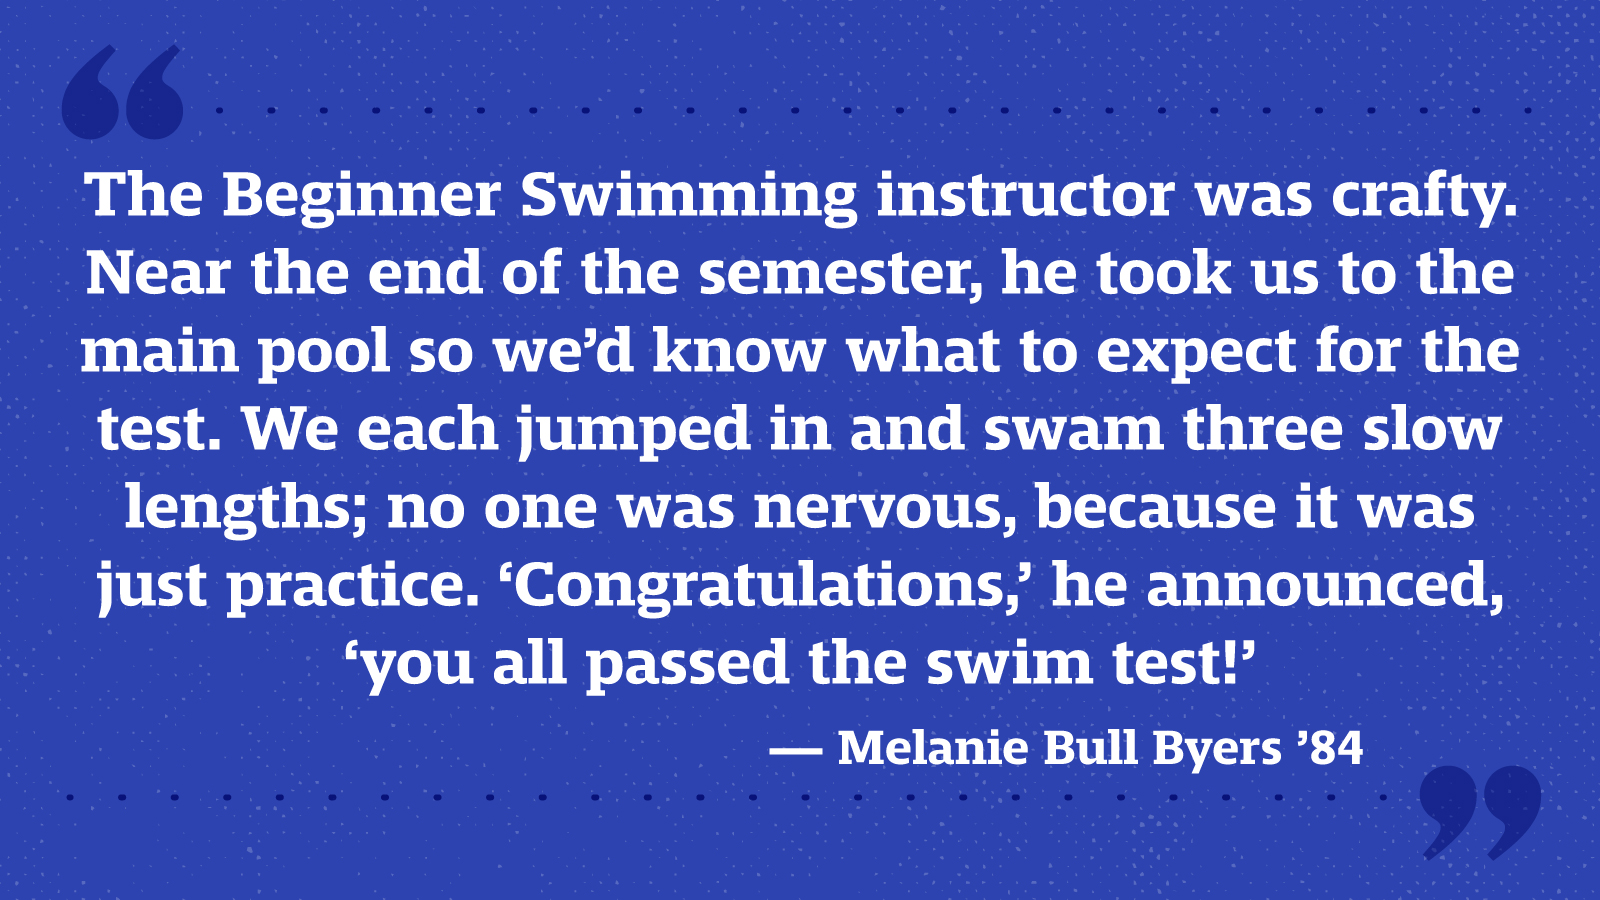 The Beginner Swimming instructor was crafty. Near the end of the semester, he took us to the main pool so we’d know what to expect for the test. We each jumped in and swam three slow lengths; no one was nervous, because it was just practice. ‘Congratulations,’ he announced, ‘you all passed the swim test!’ — Melanie Bull Byers ’84